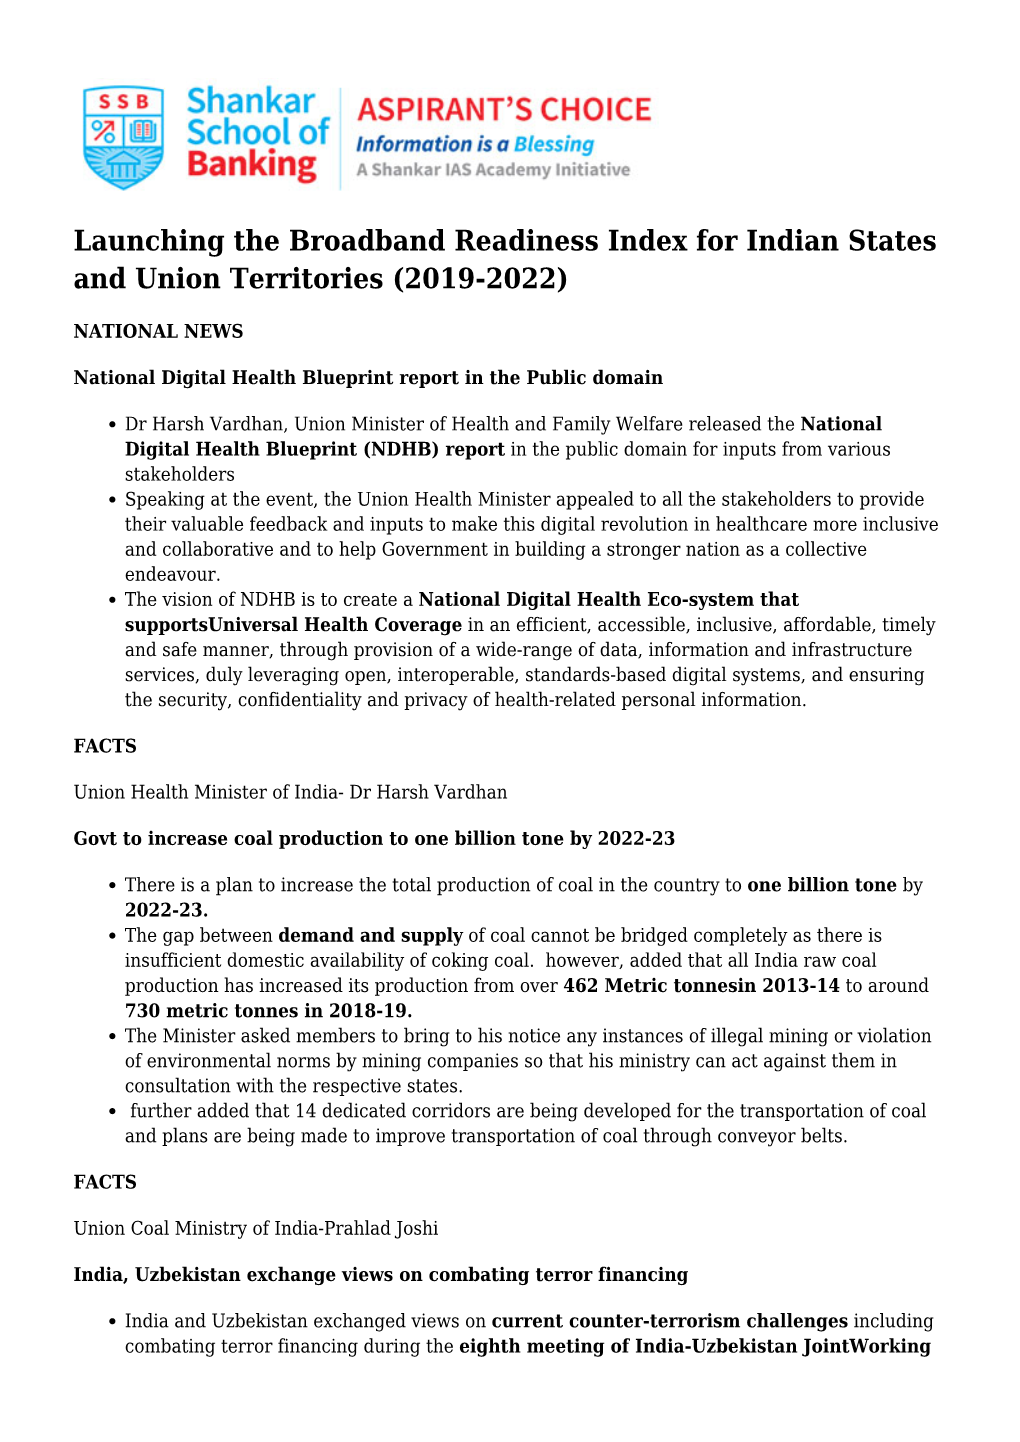 Launching the Broadband Readiness Index for Indian States and Union Territories (2019-2022)